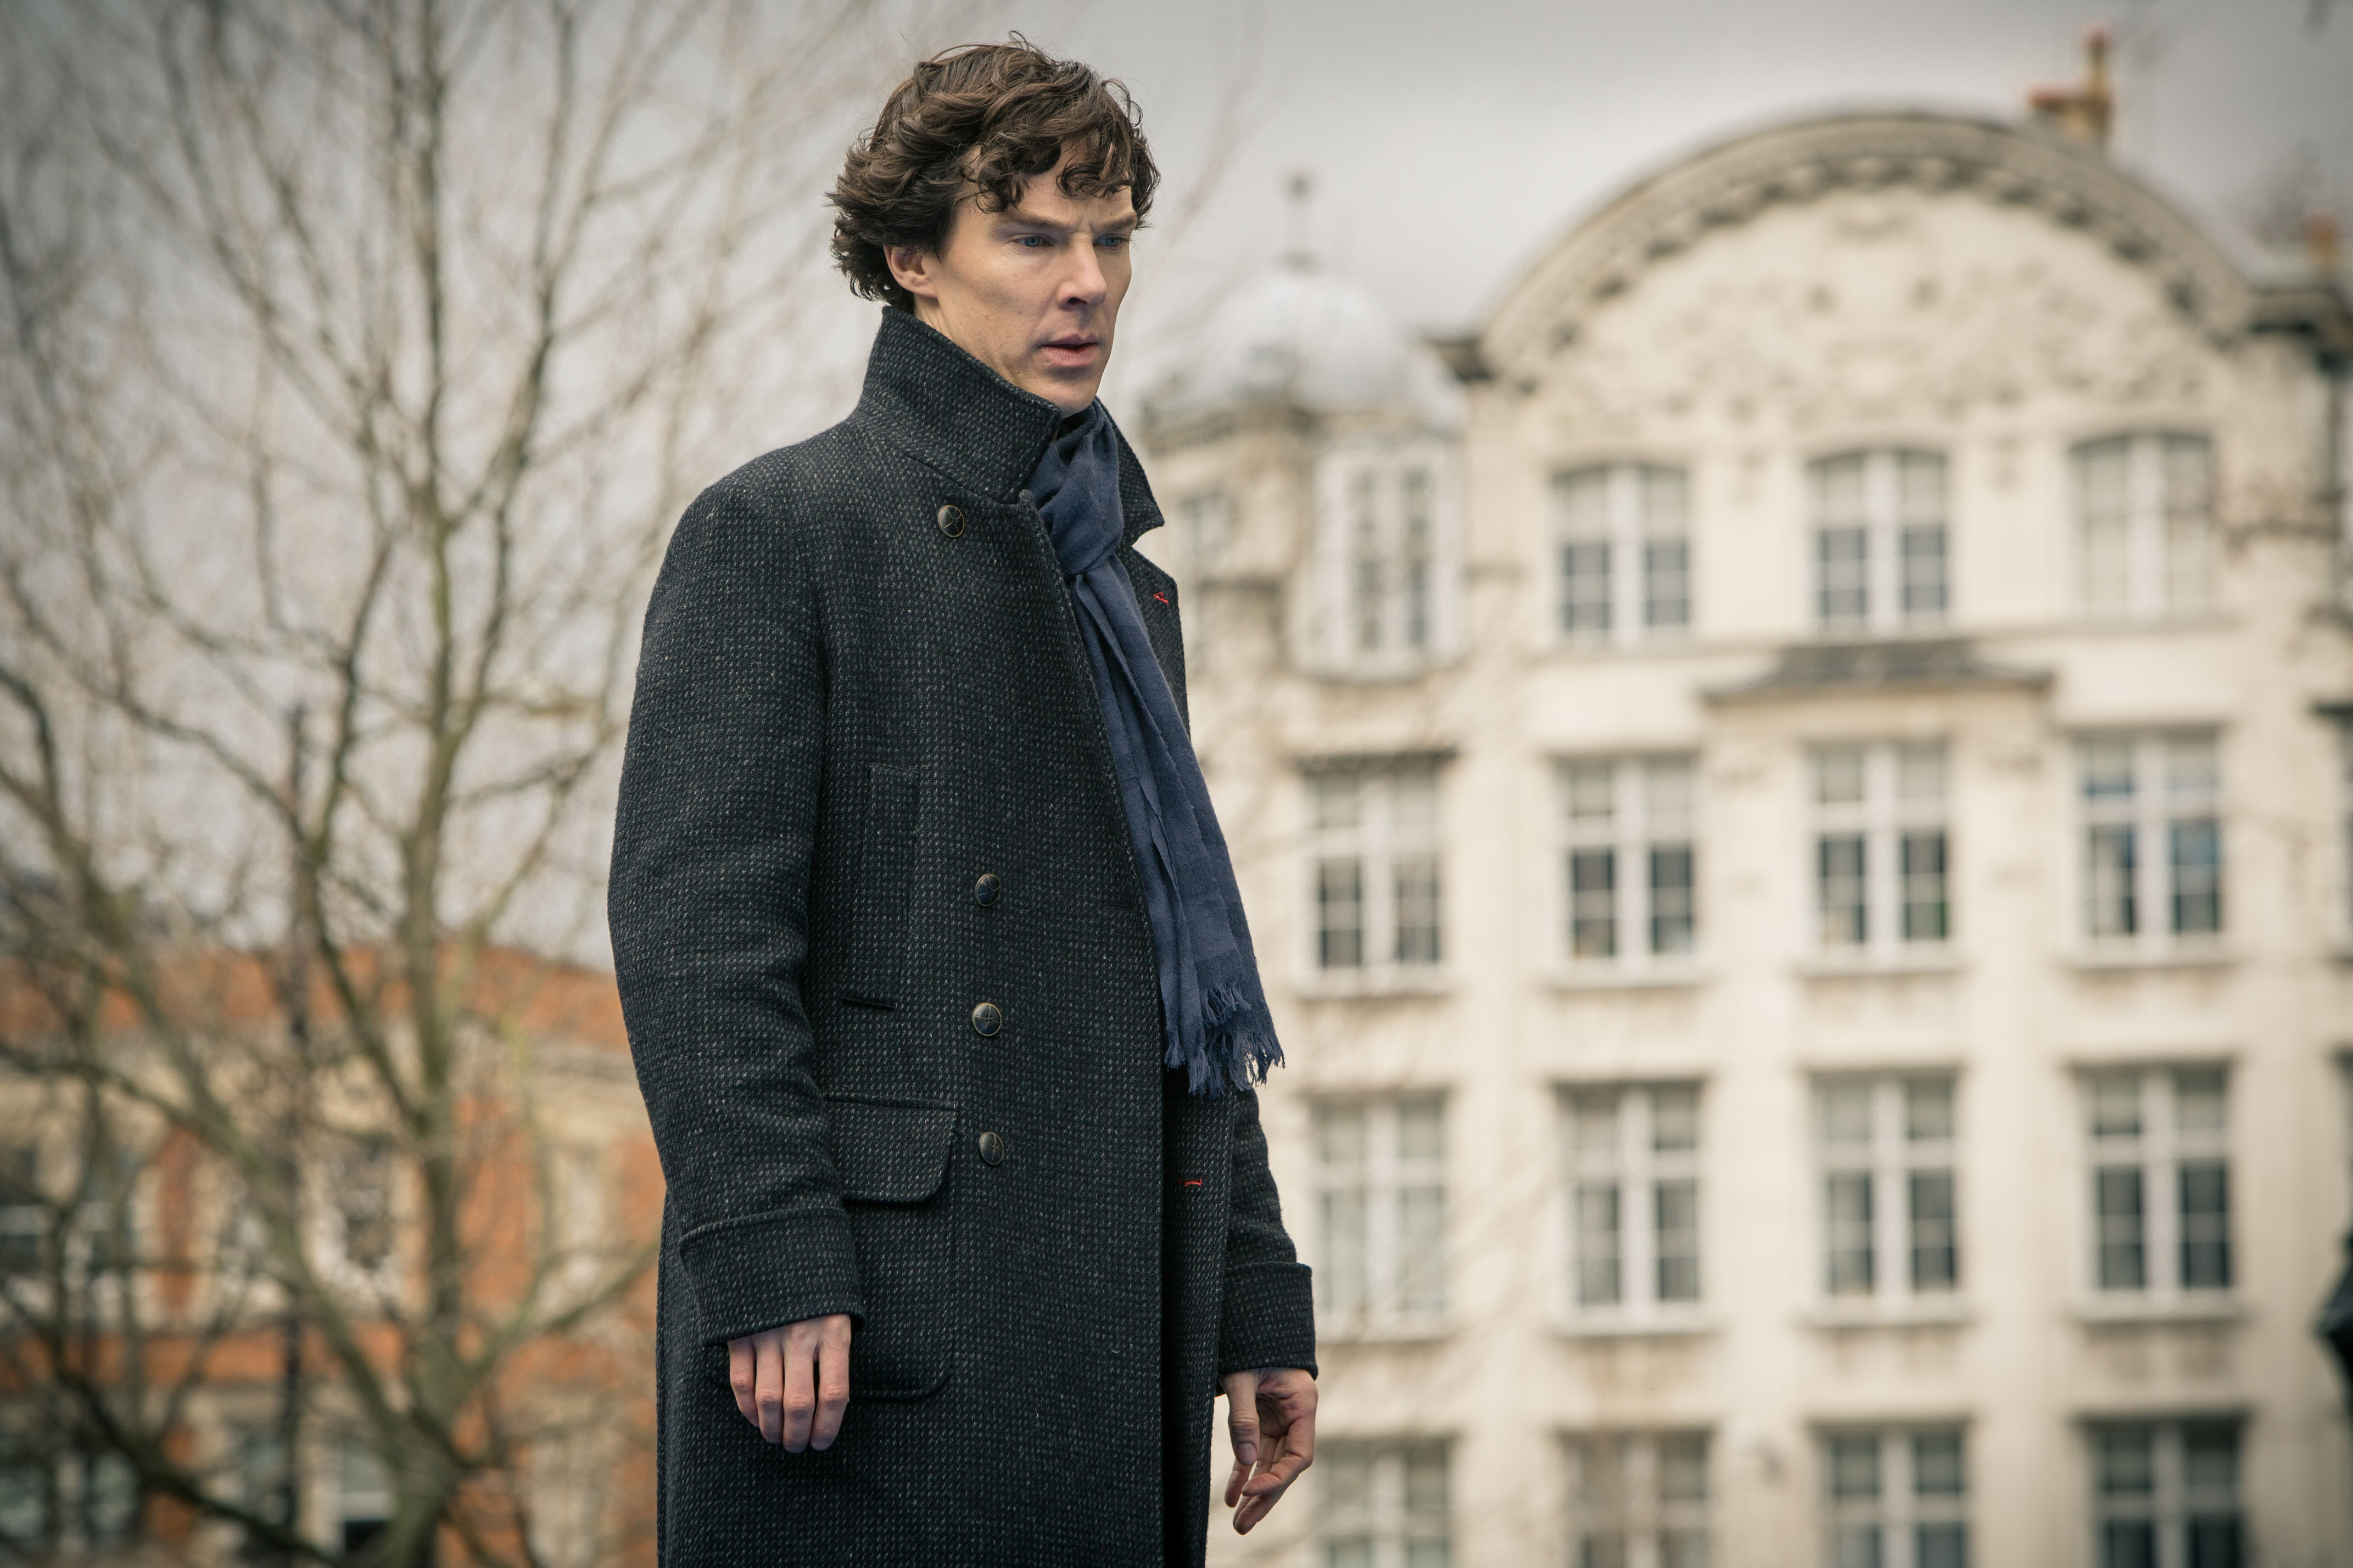 Sherlock is back! Well, almost. (Photo: (Photo: Courtesy of (C)Robert Viglasky/Hartswood Films for MASTERPIECE)